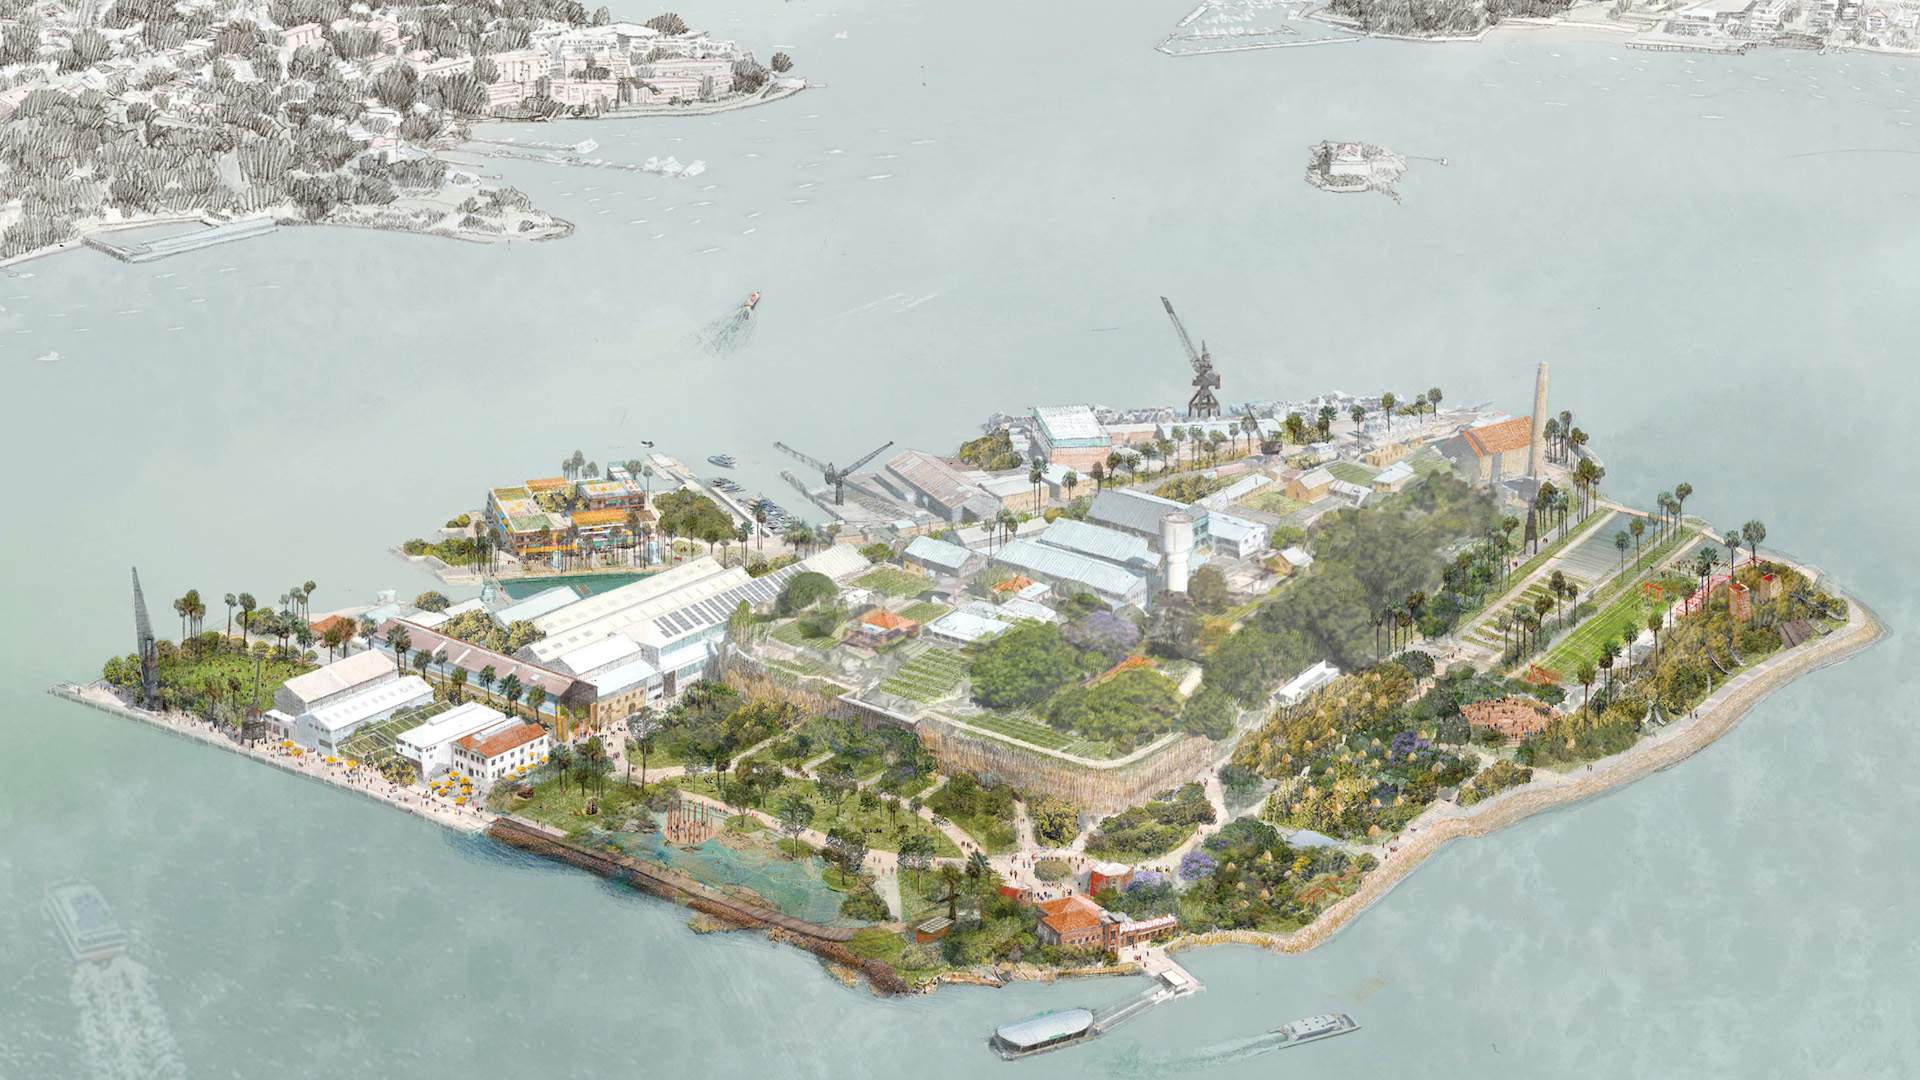 A Vision to Transform Cockatoo Island Into a Sprawling Arts and Culture District Has Been Revealed